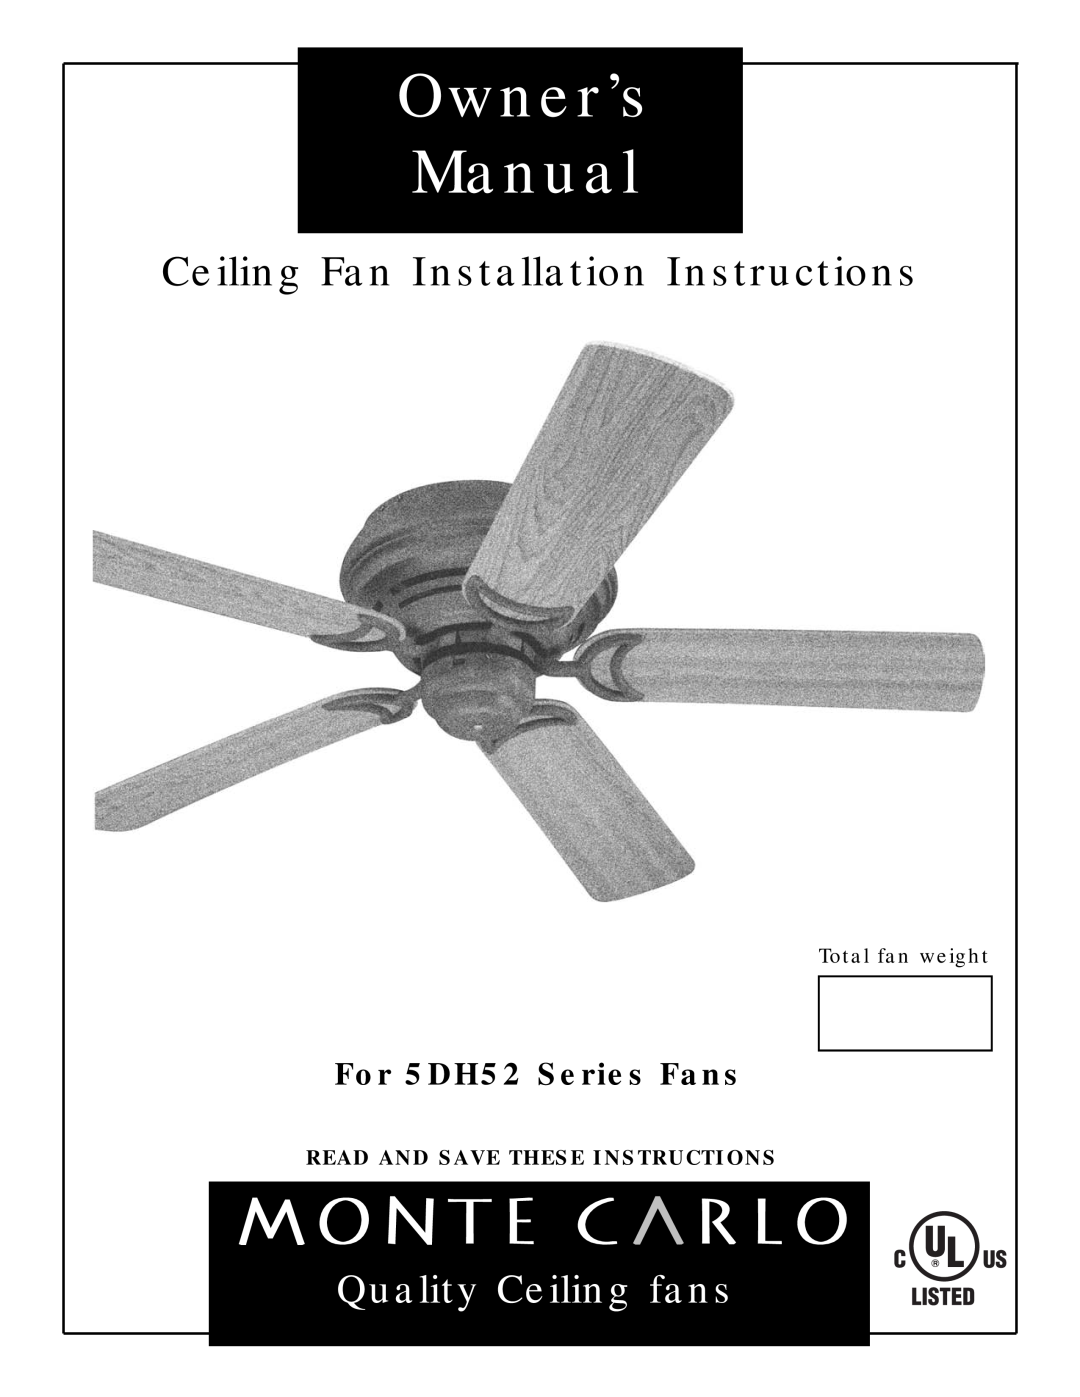 Monte Carlo Fan Company owner manual For 5DH52 Series Fans, Total fan weight, Read And Save These Instructions 